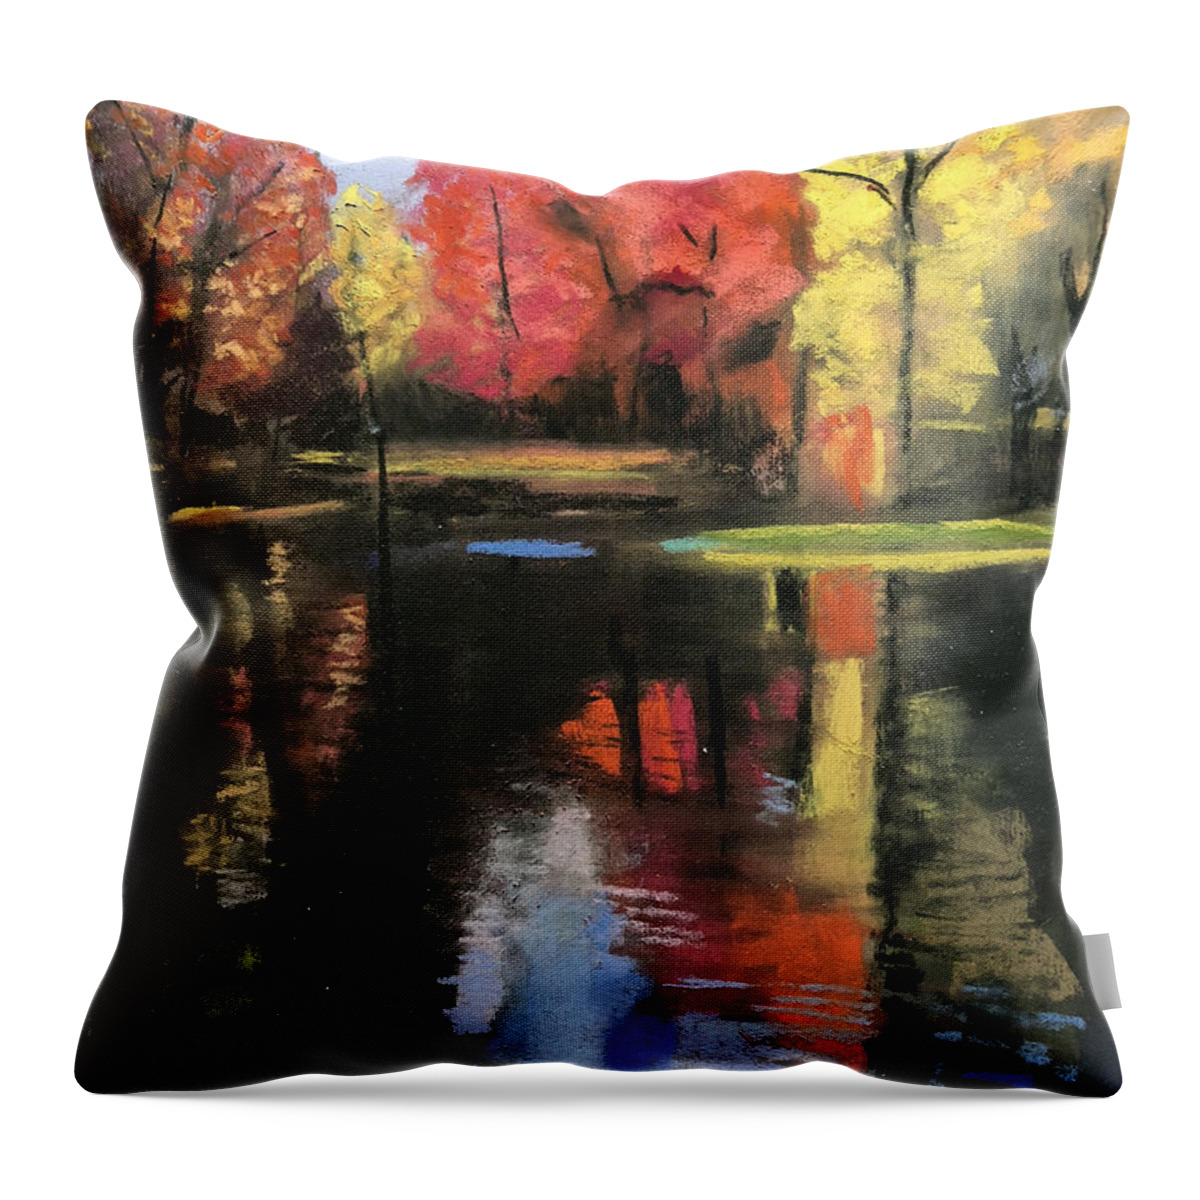 Meramec Springs Throw Pillow featuring the painting Reflections at Meramec Springs by Ruben Carrillo